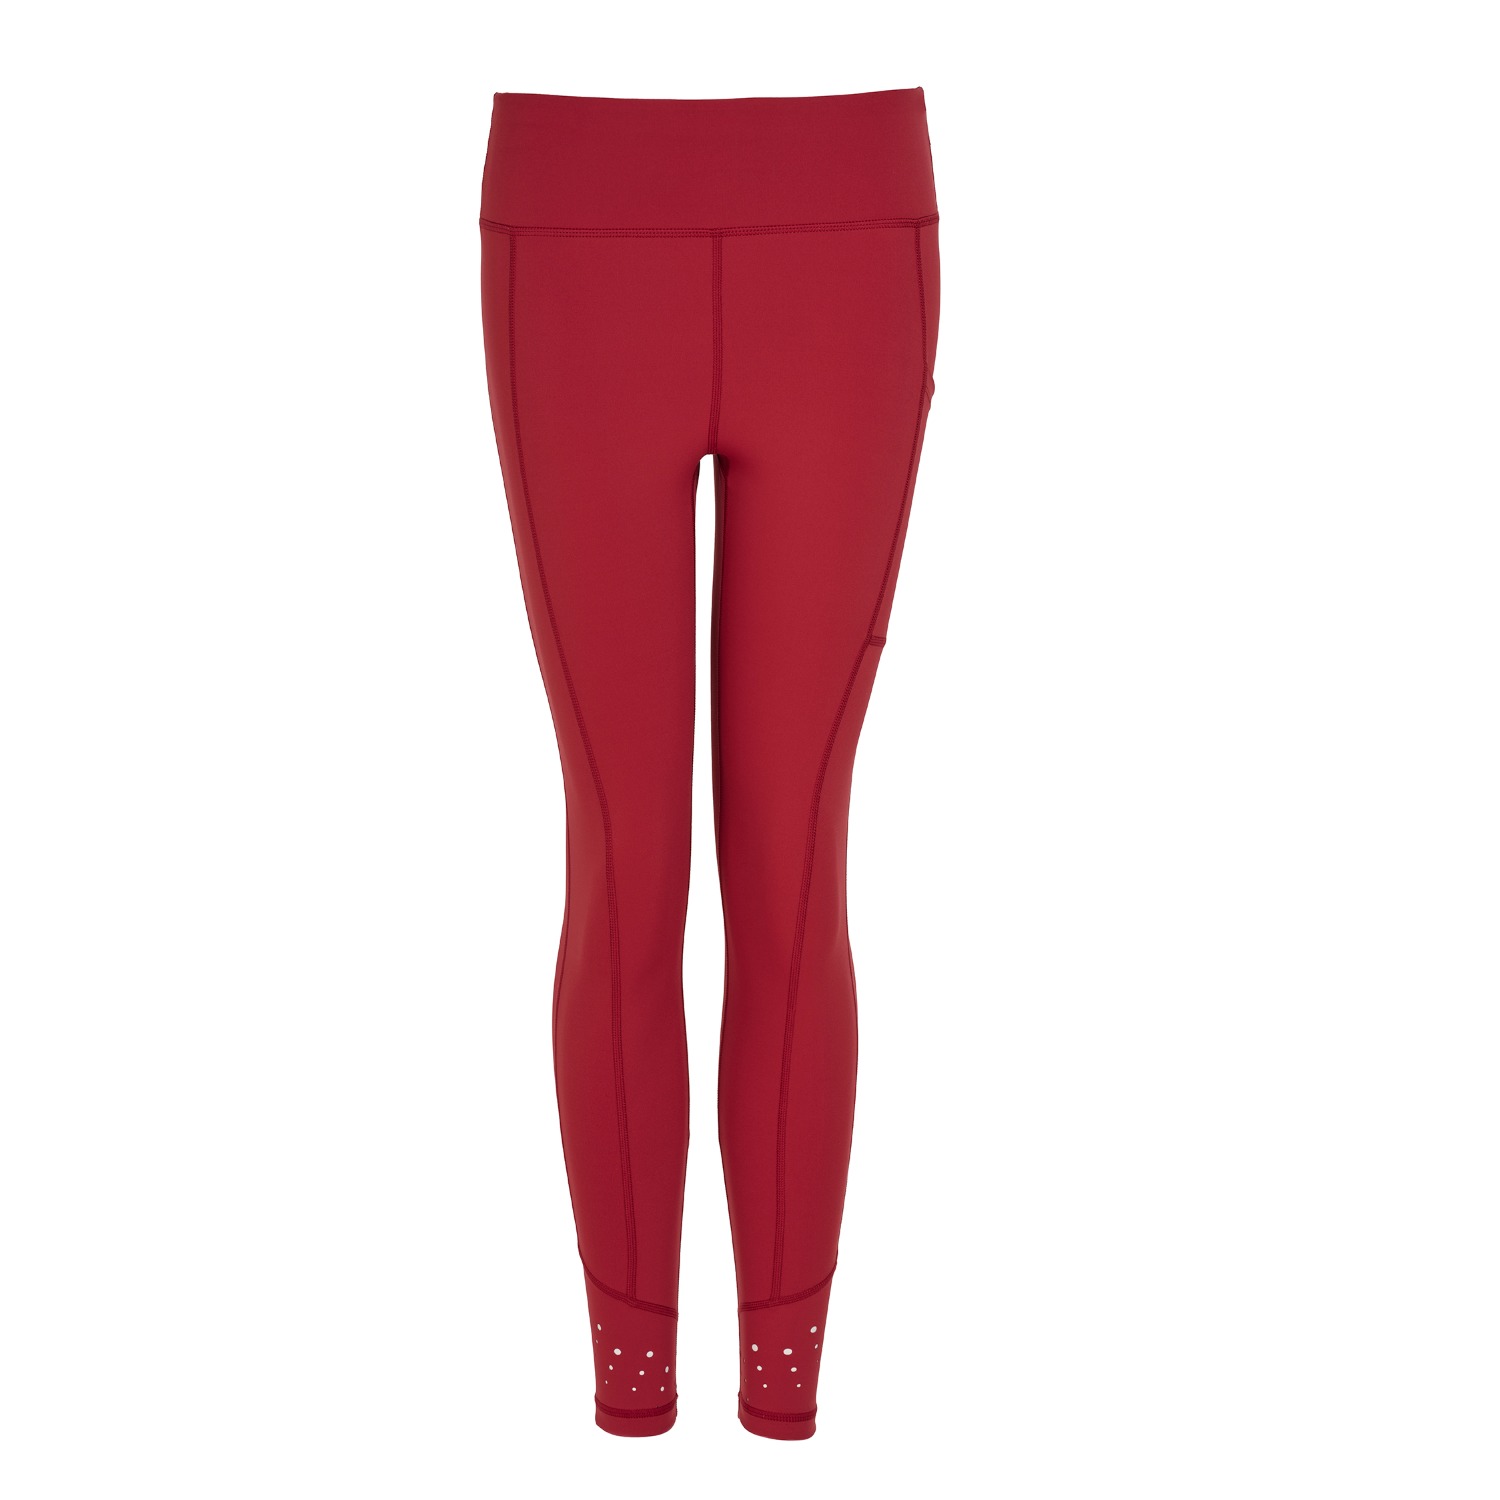  Women's Leggings - Reds / Women's Leggings / Women's Clothing:  Clothing, Shoes & Jewelry